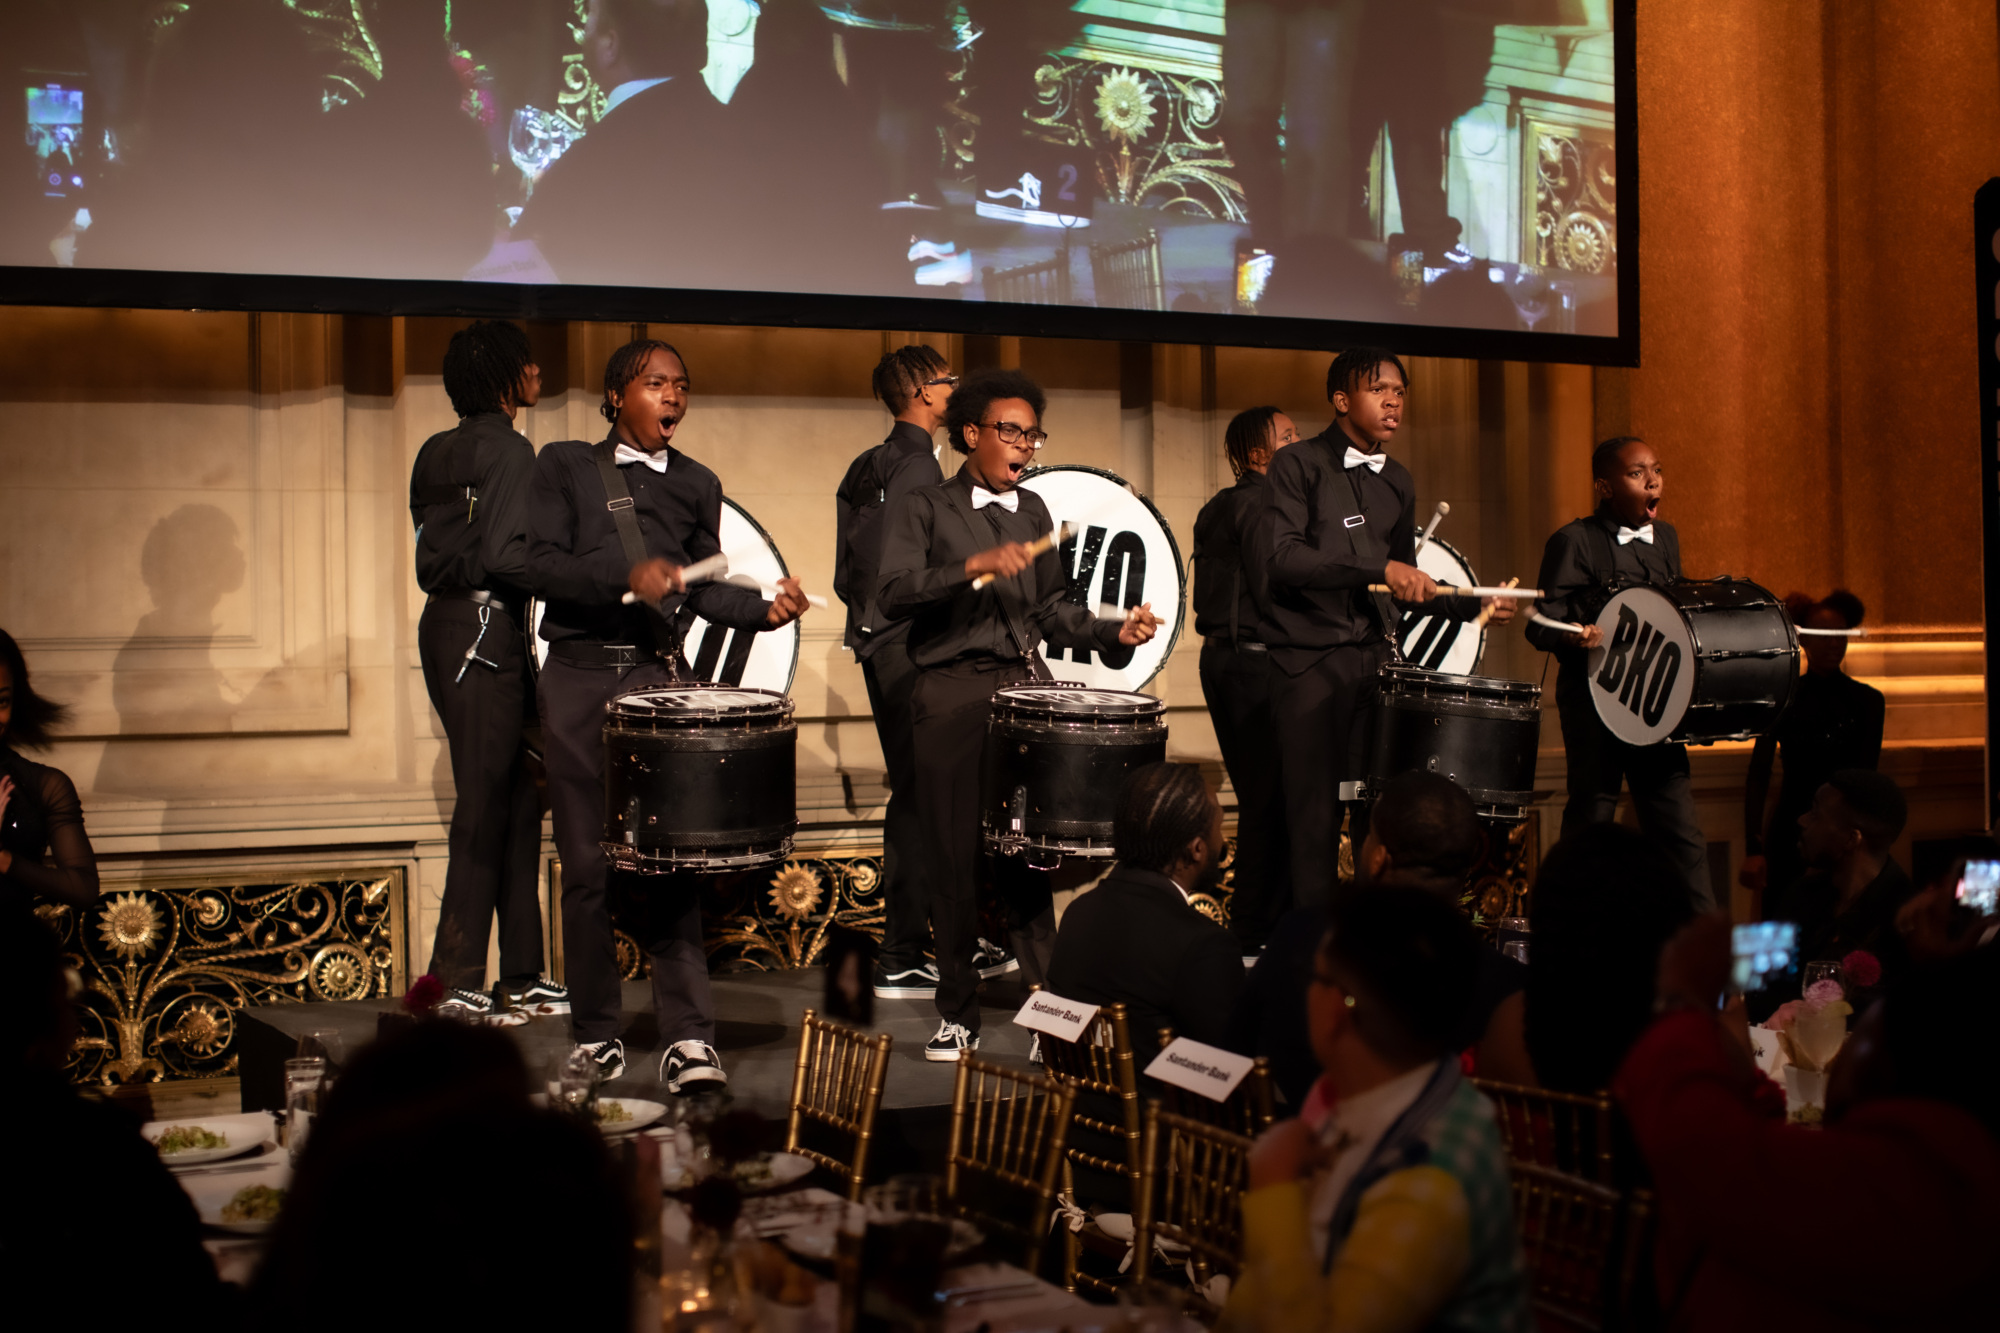 A group of men in tuxedos playing drums.